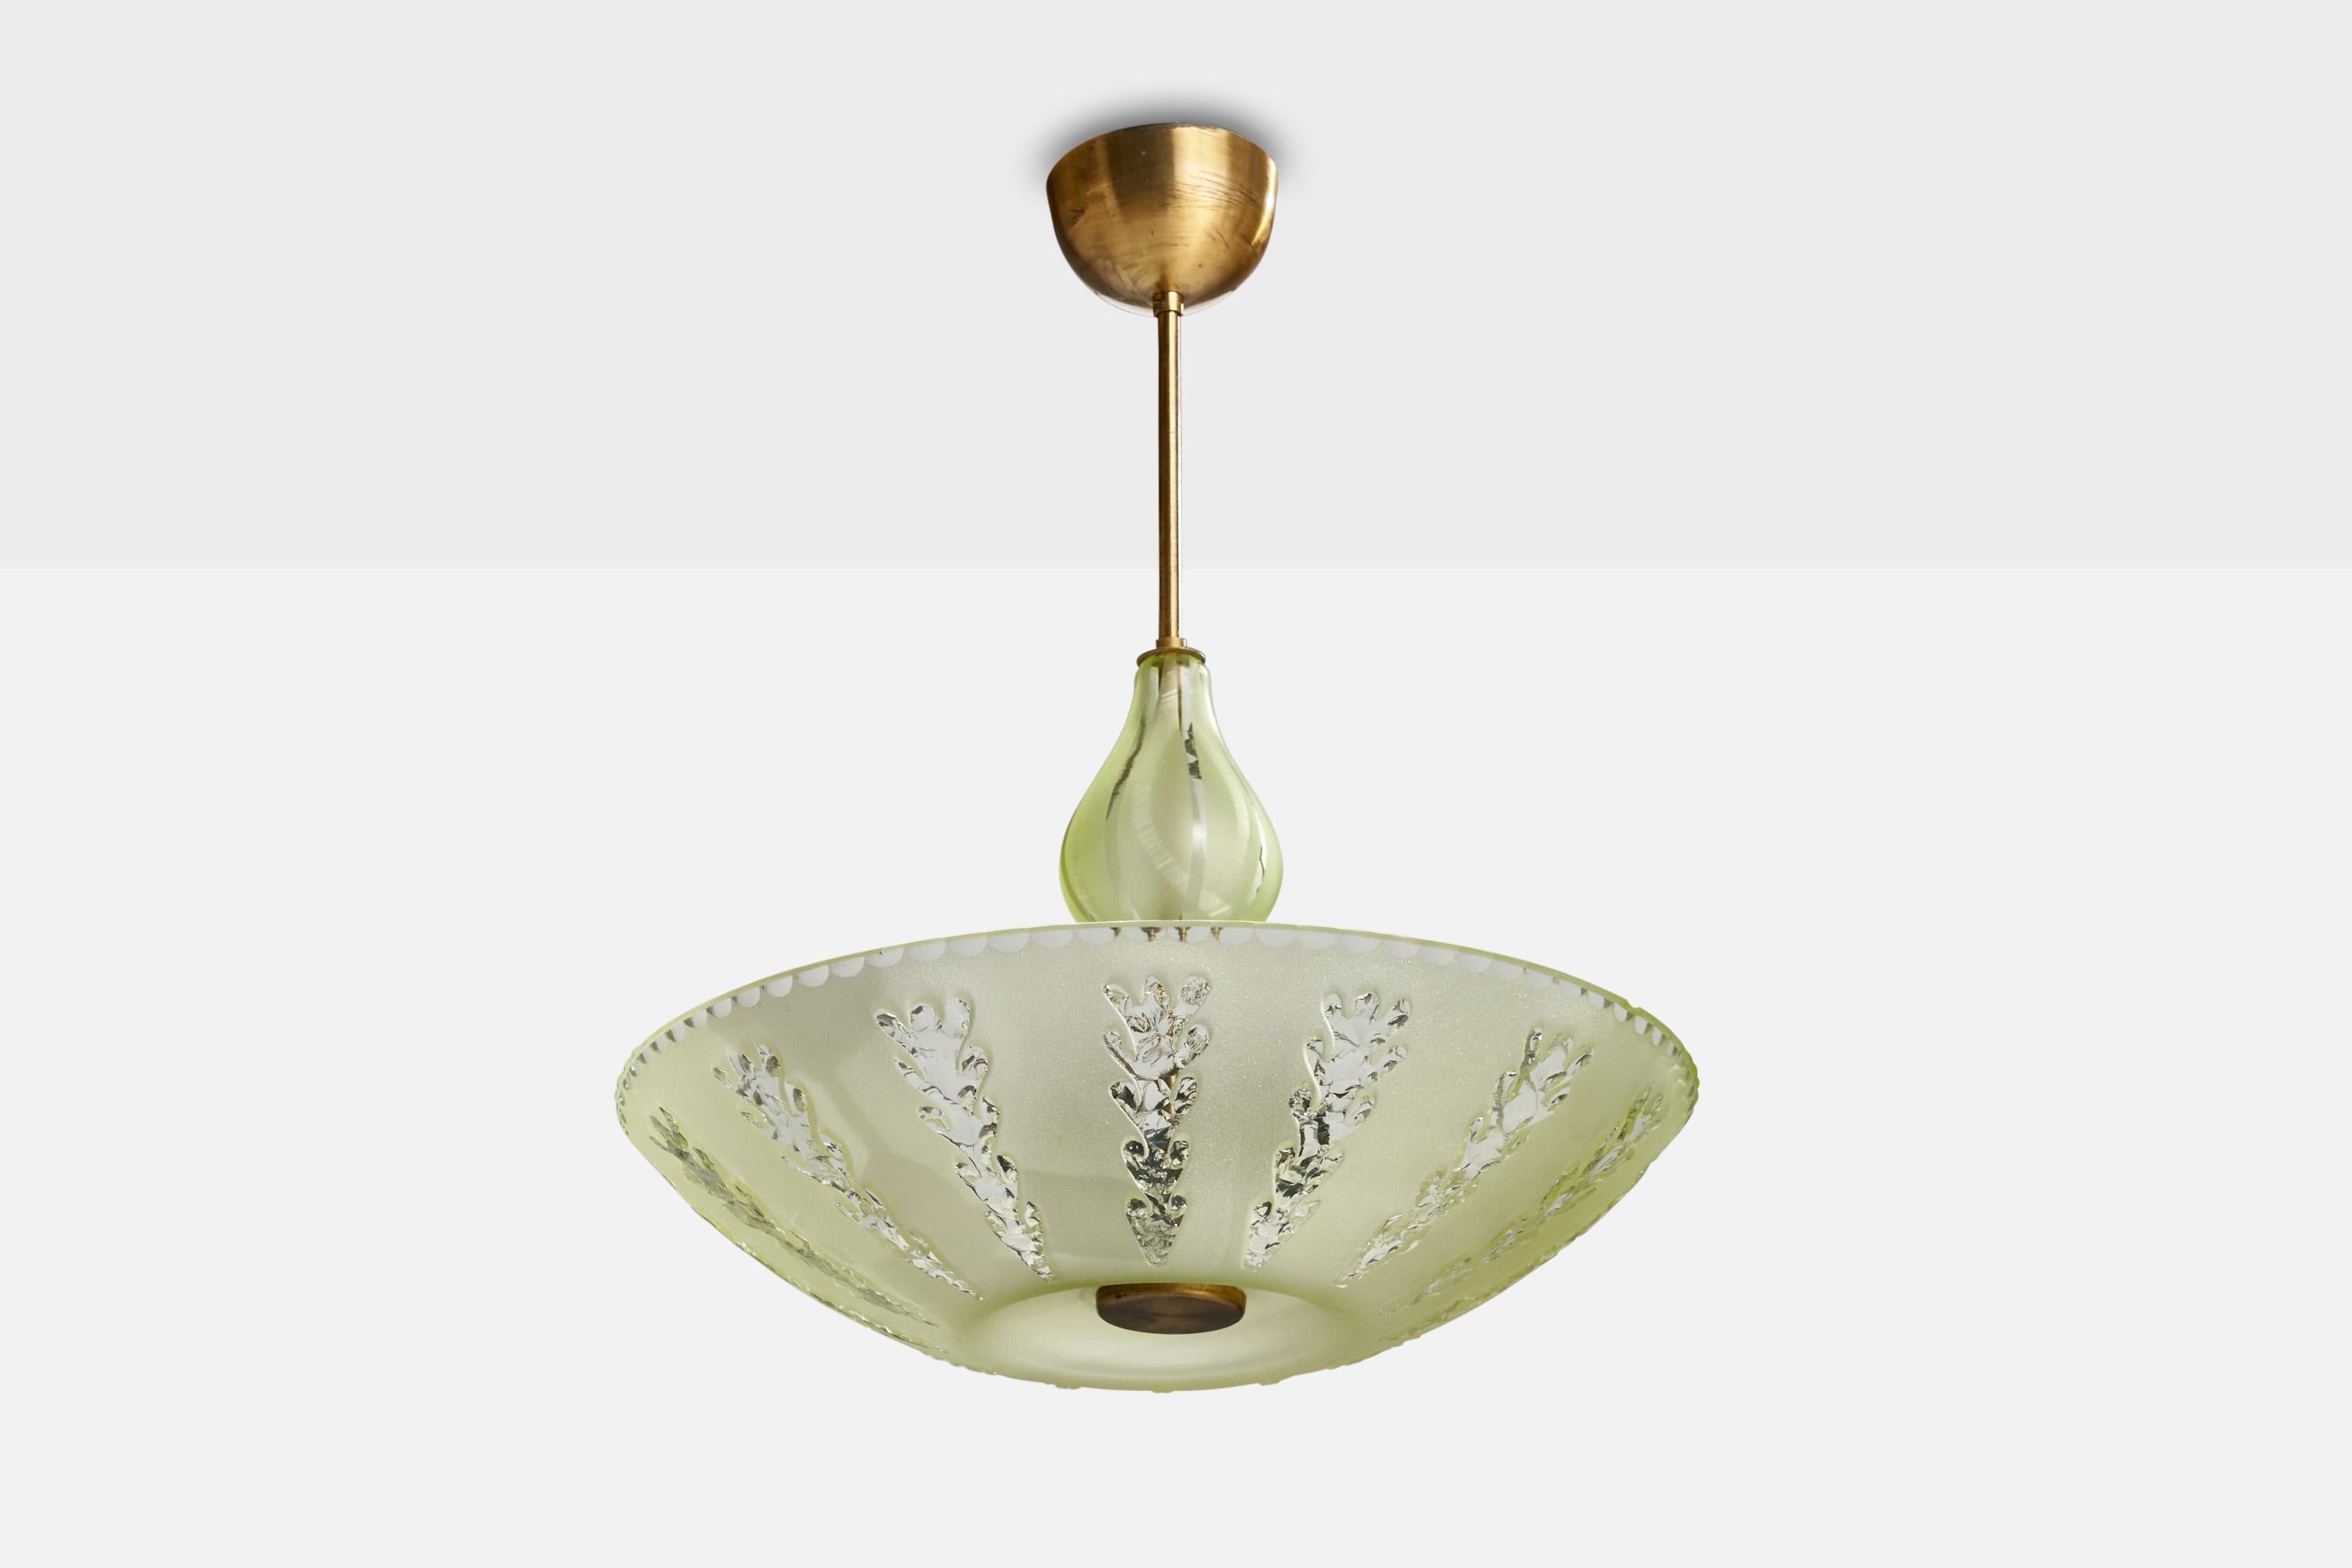 A brass and glass pendant light attributed to Orrefors, Sweden, 1940s.

Dimensions of canopy (inches): 2.82” H x 3.79” Diameter
Minor chip to inside of edge of lampshade present as illustrated.
Socket takes standard E-26 bulbs. 3 socket.
There is no